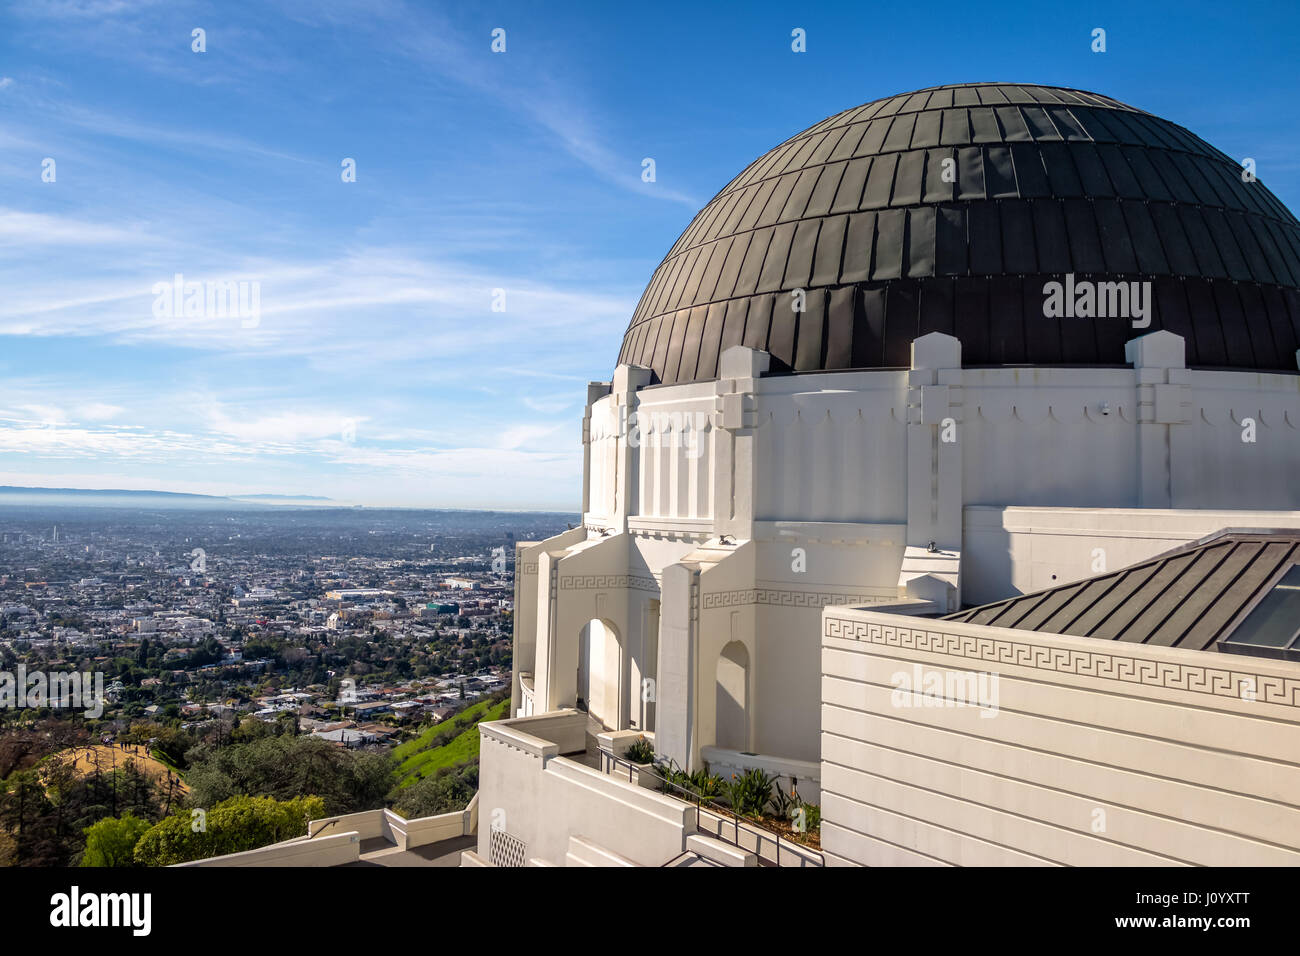 Griffith Observatory and city skyline - Los Angeles, California, USA Stock Photo